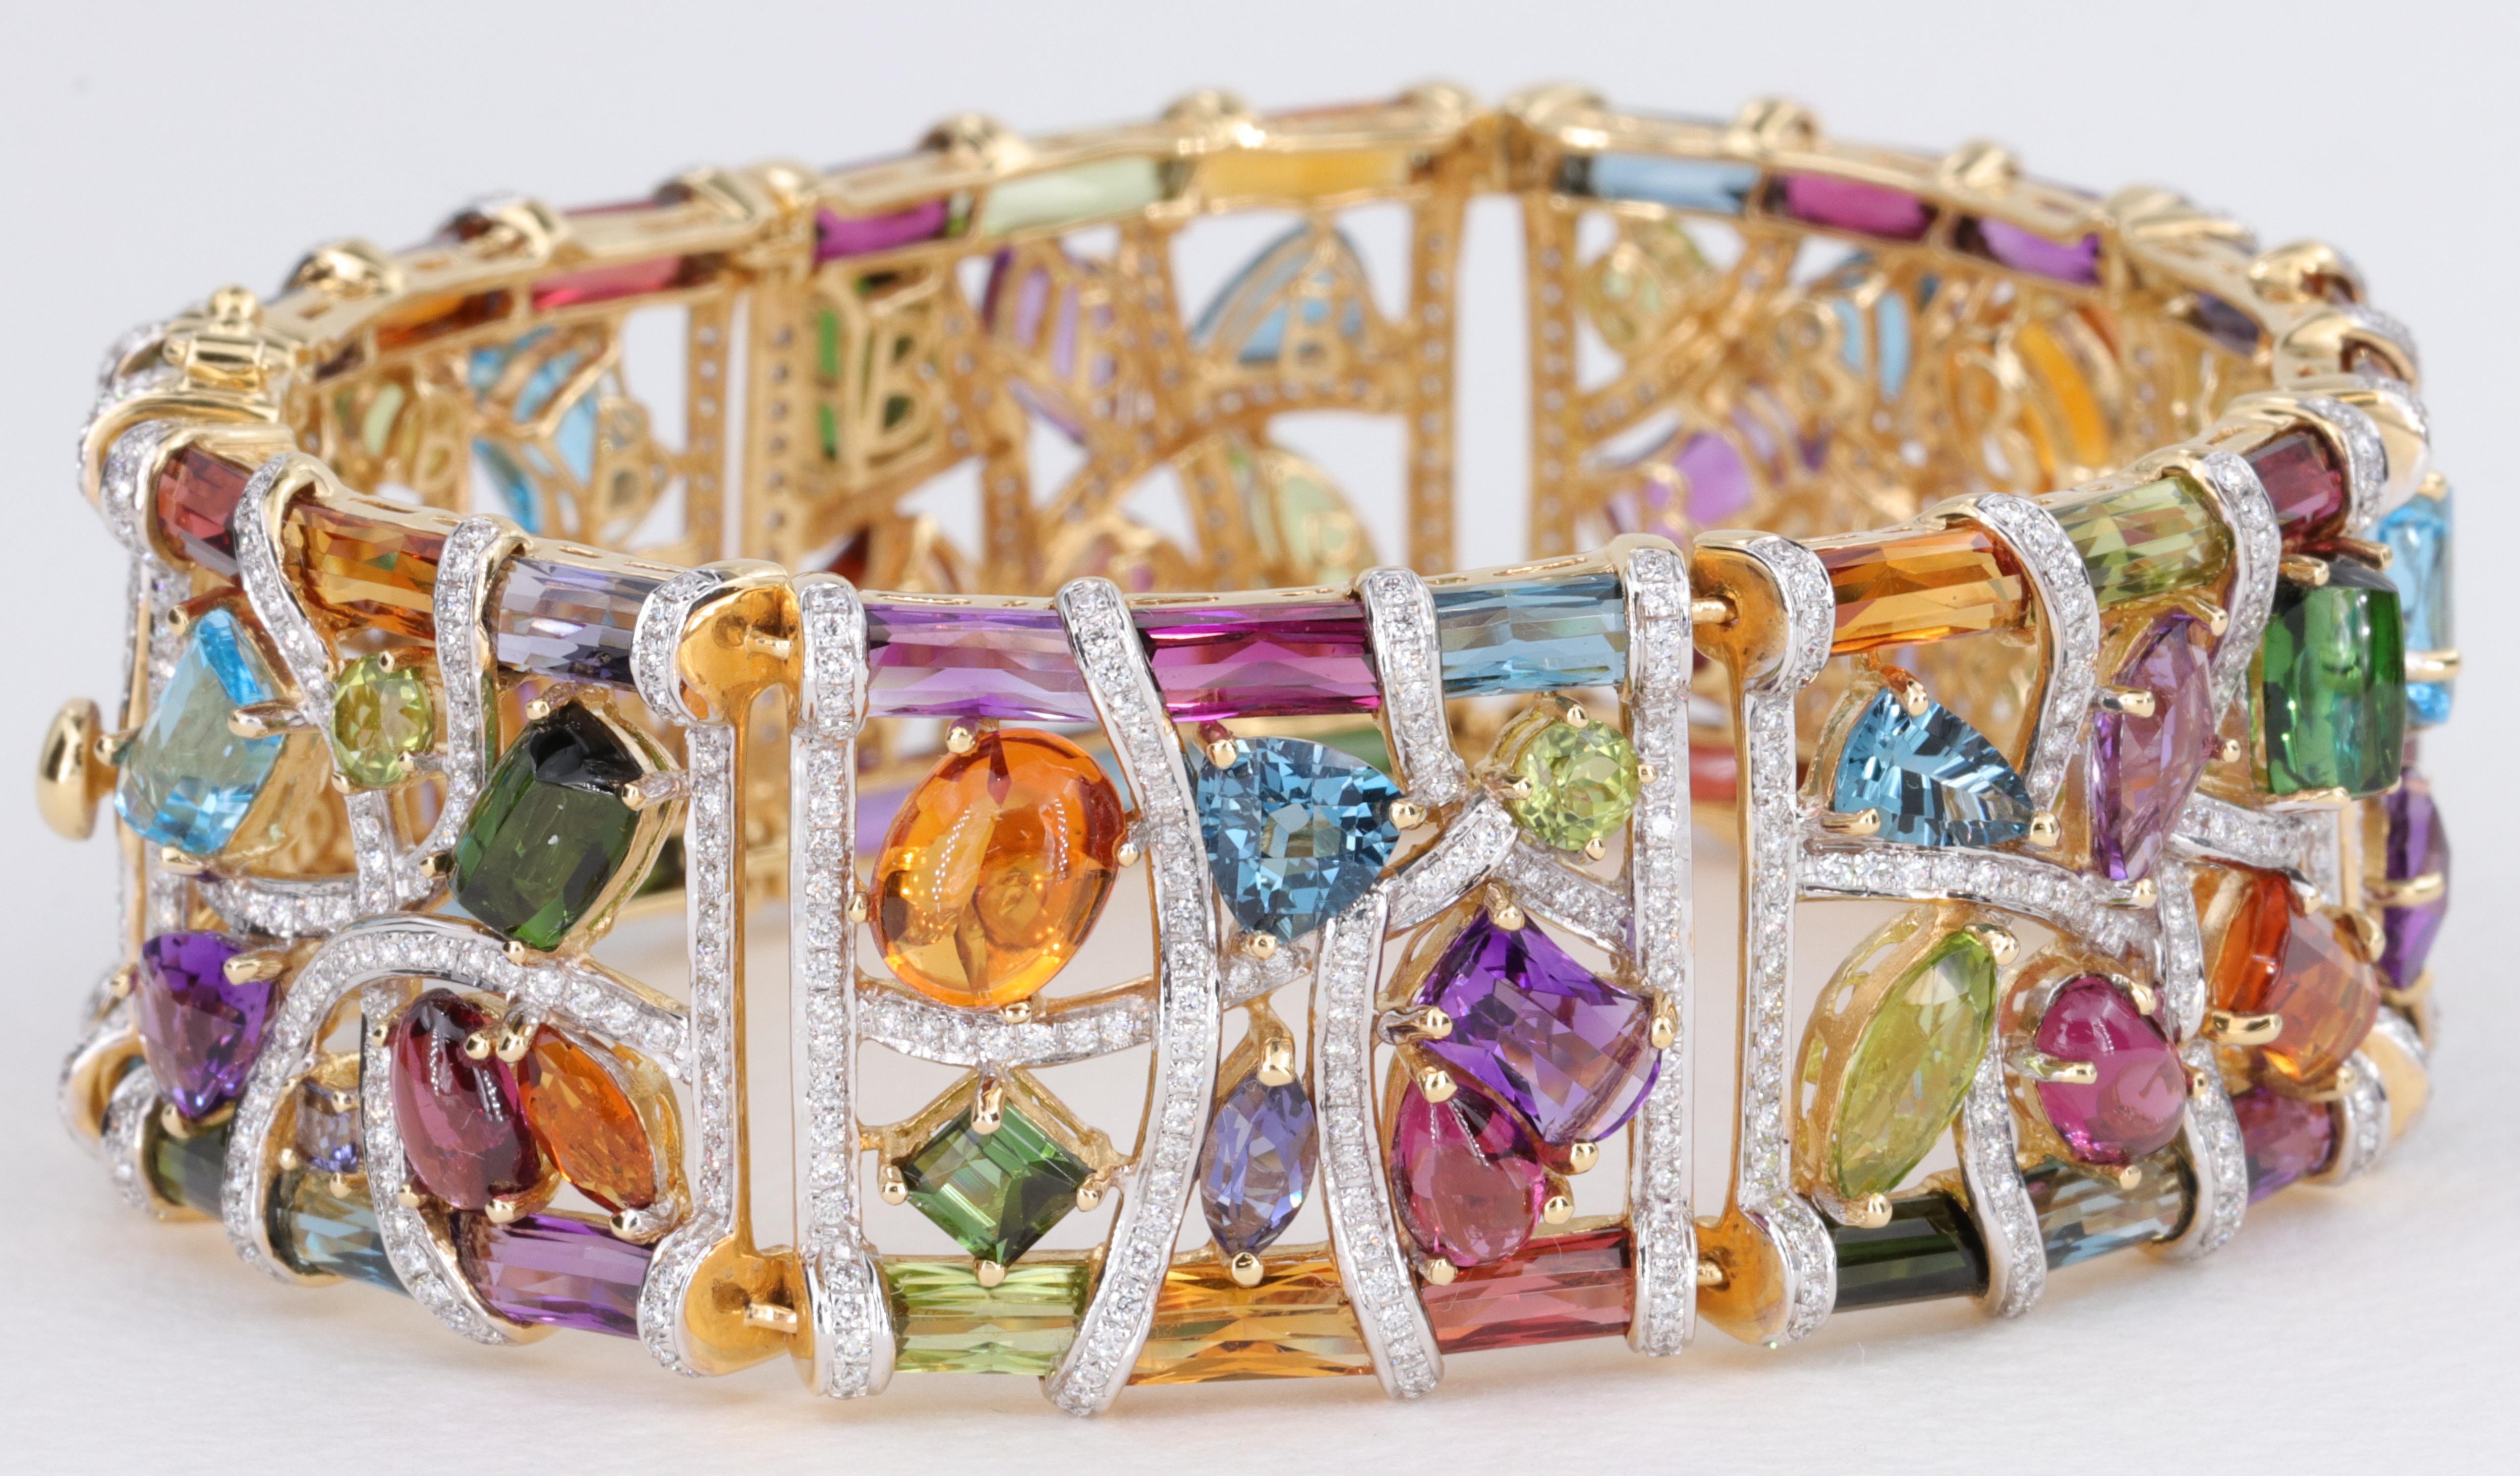 Cabochon Bellarri Limited Edition Bracelet From The Marquesa Collection